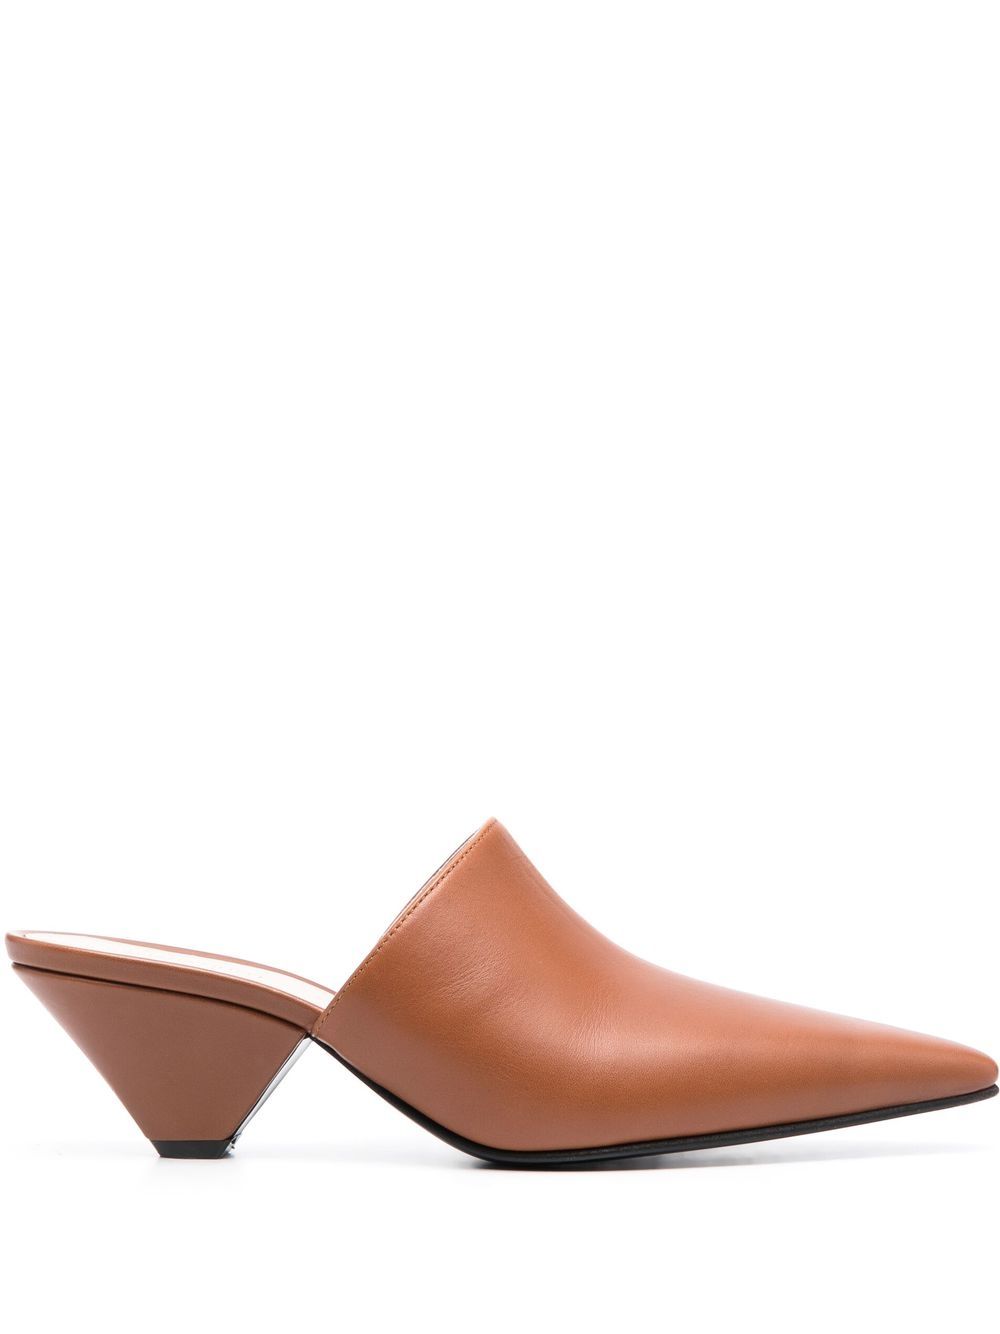 Fabiana Filippi Pointed 55mm Leather Mules In Braun